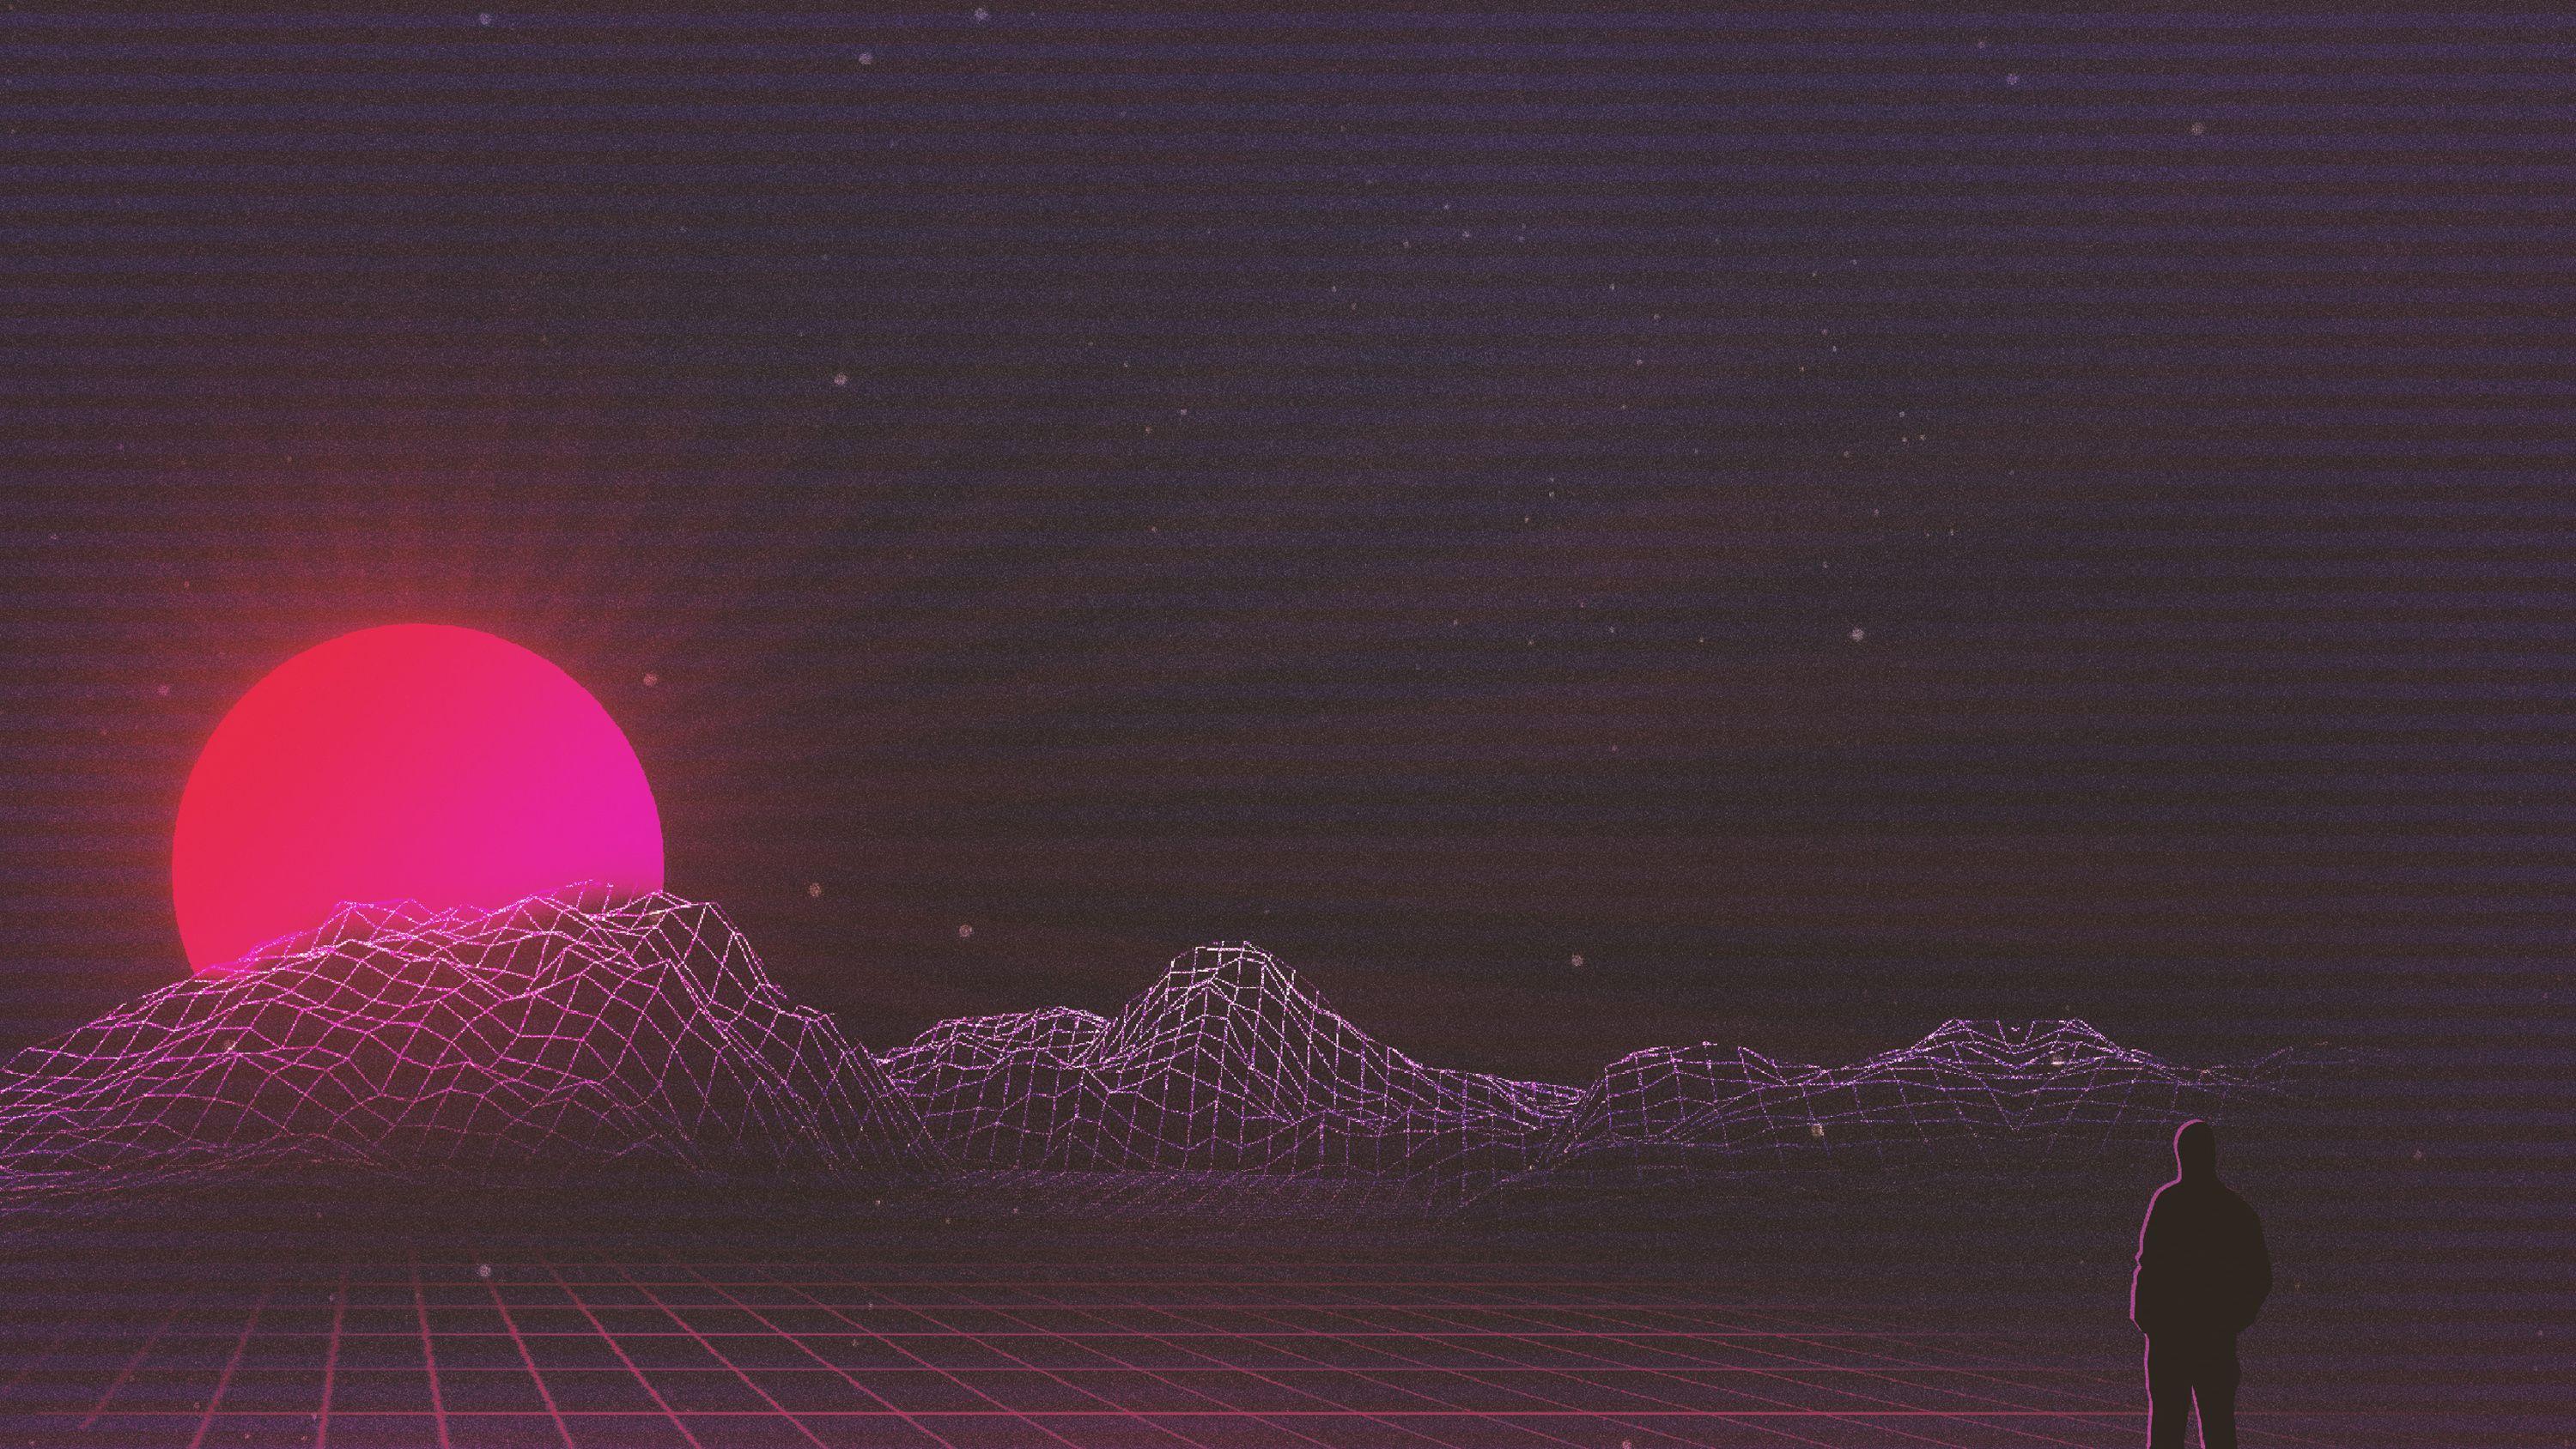 5074177 / Retro Wave, Sunset wallpapers.